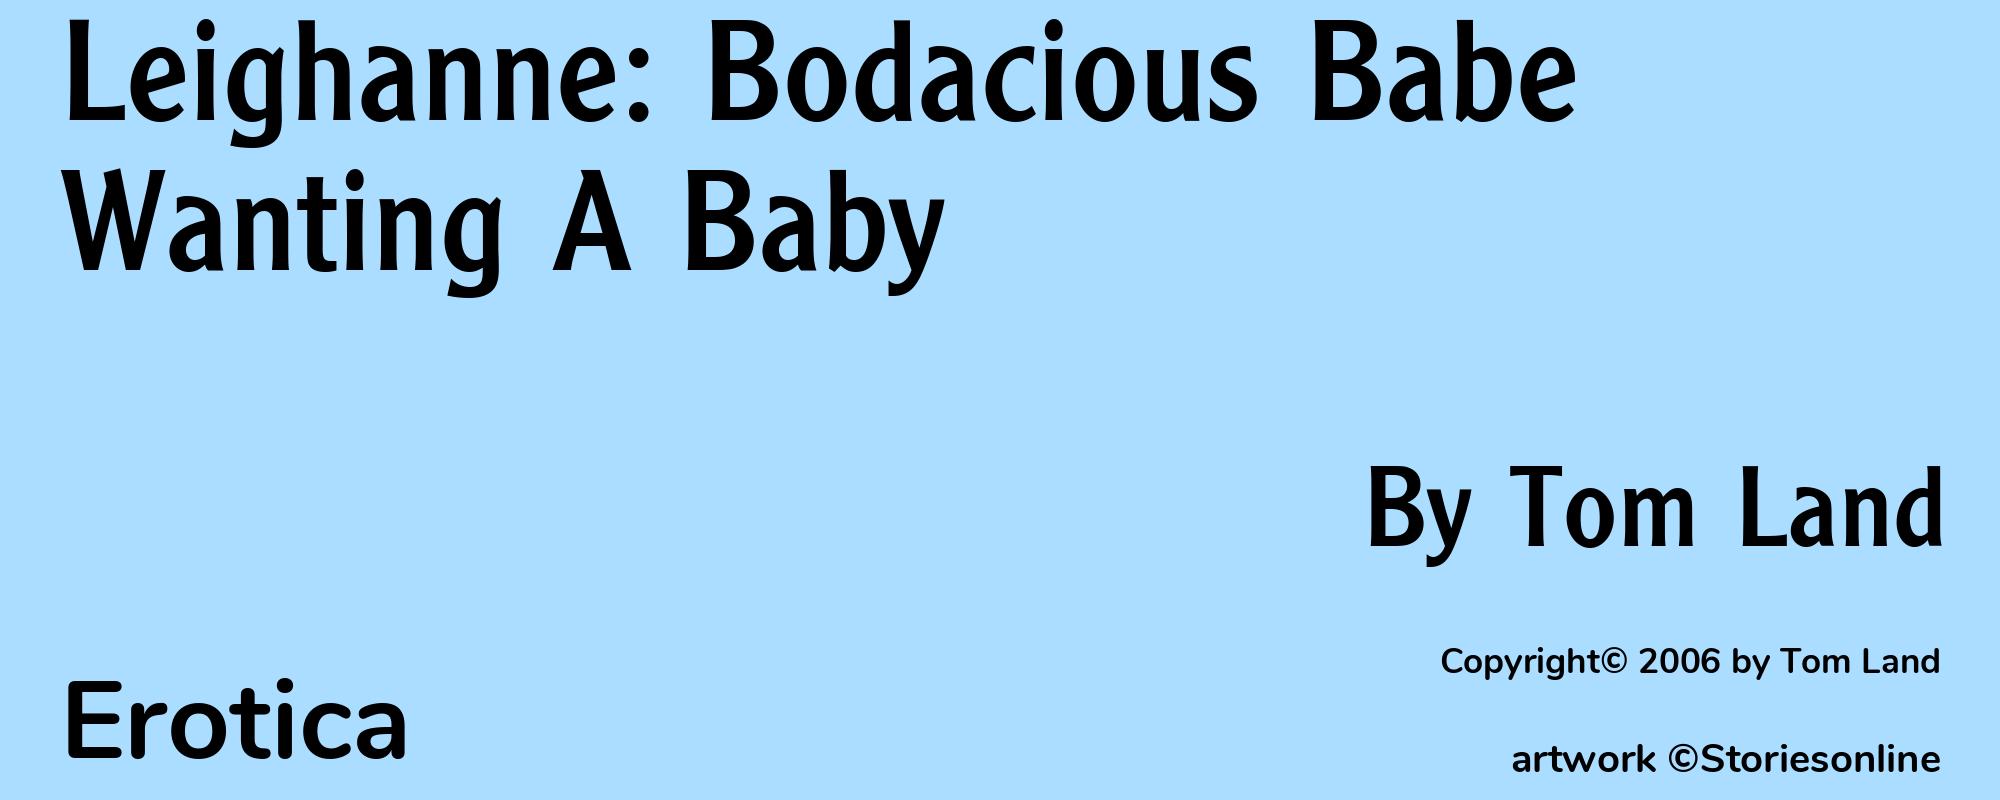 Leighanne: Bodacious Babe Wanting A Baby - Cover